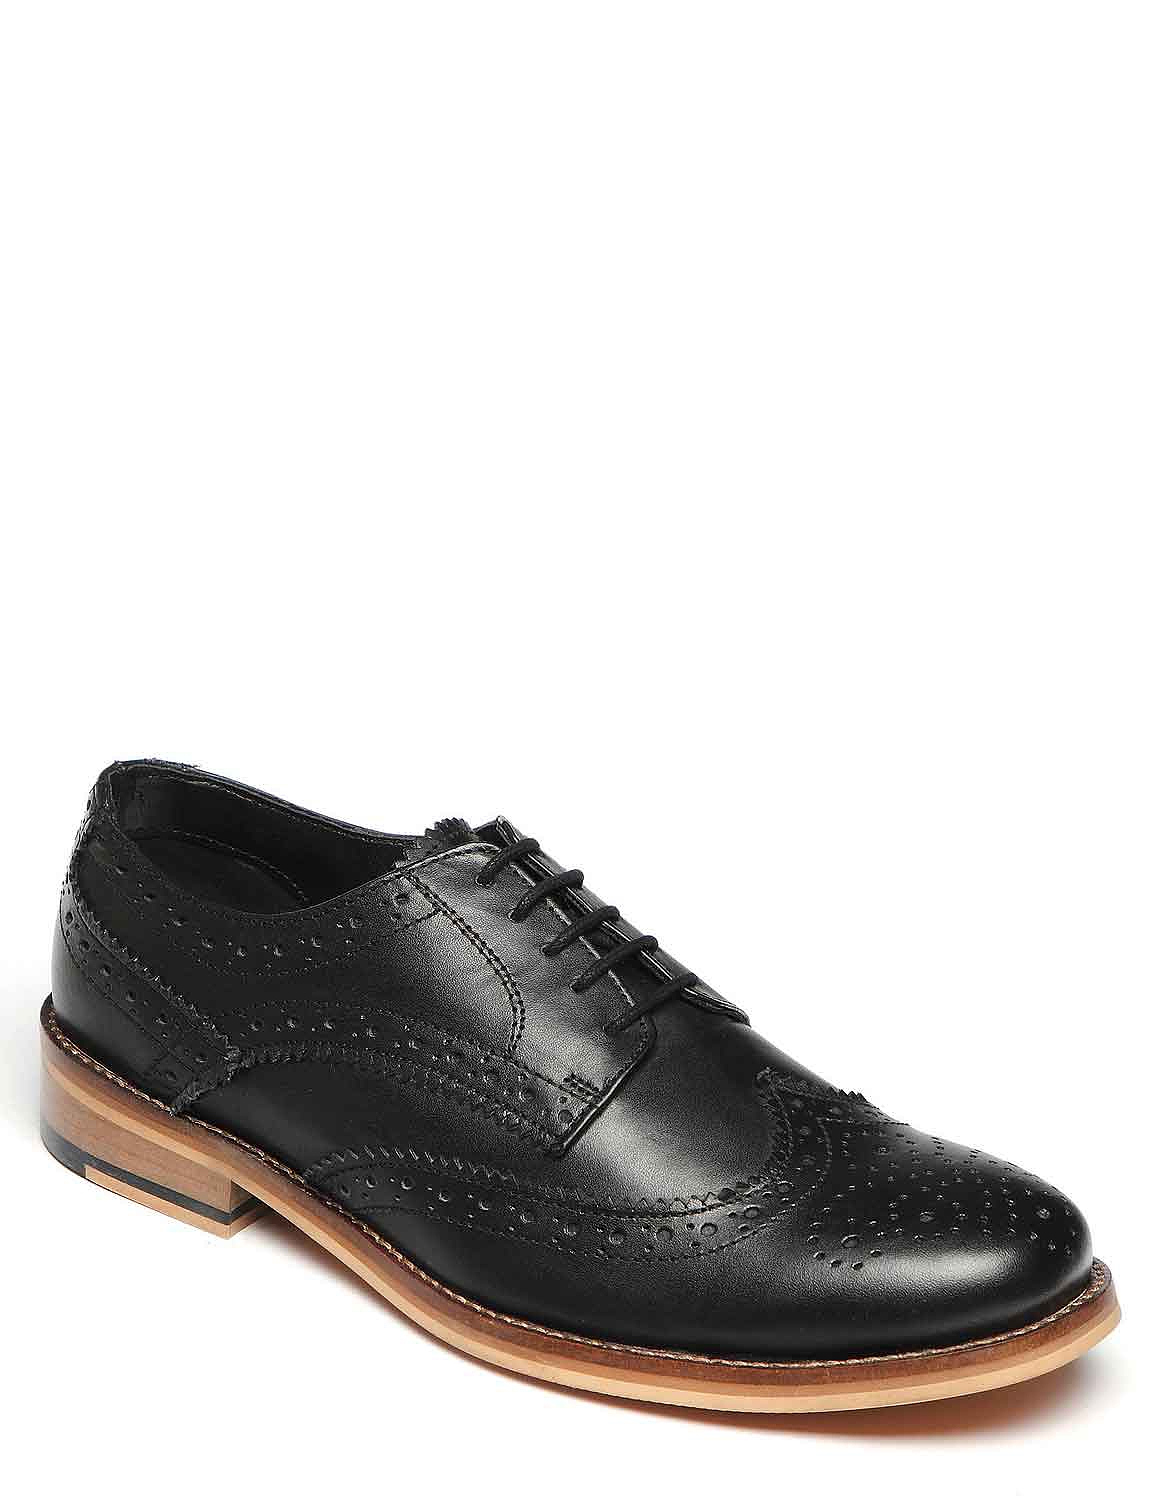 Real Leather Brogue | Chums